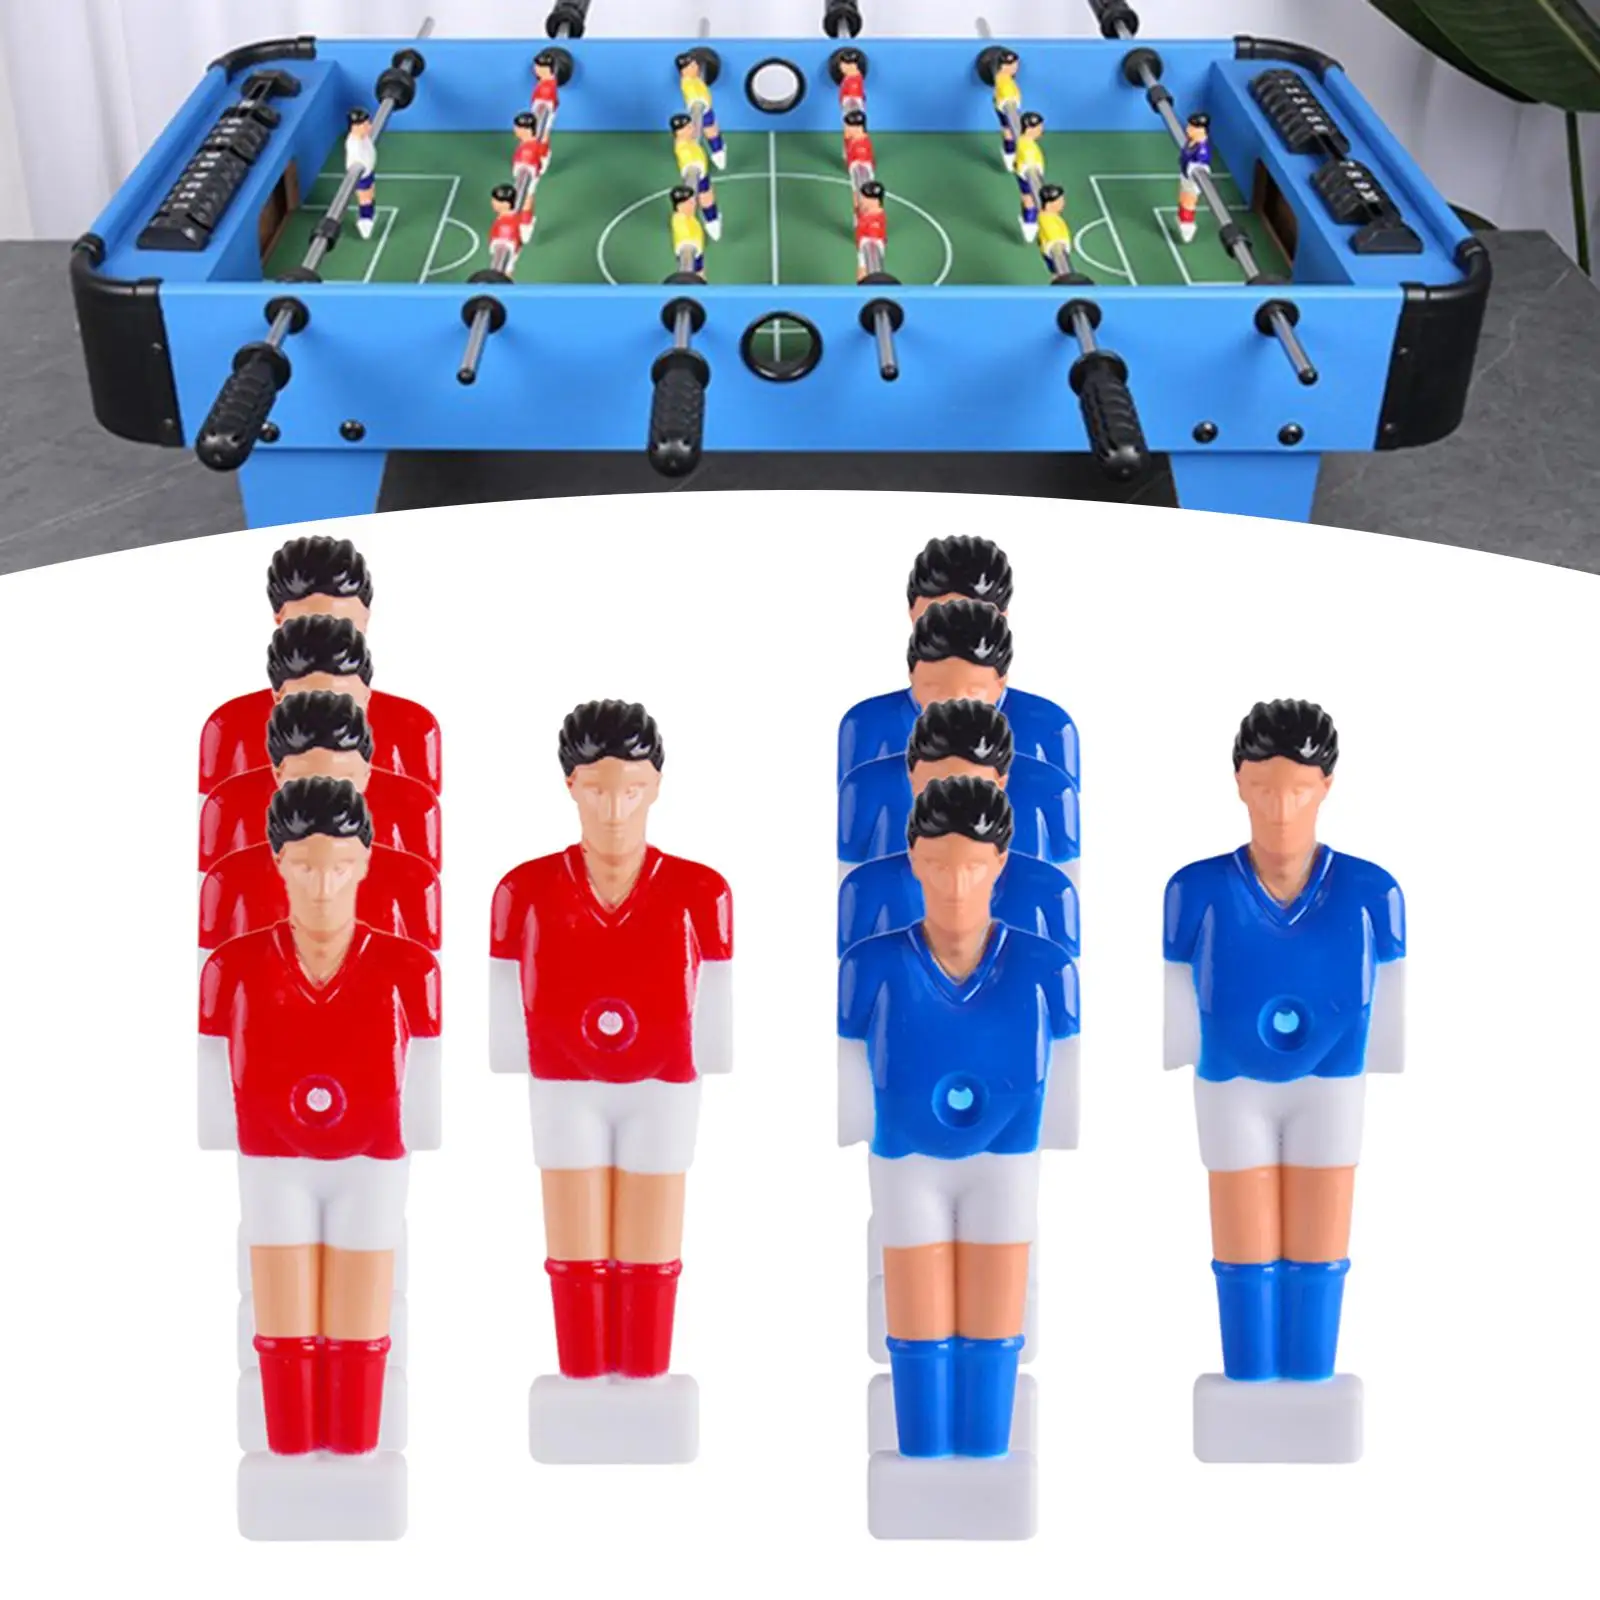 10 x Soccer Player Part Humanoid Replacement Parts Universal Foosball Men Foosball Table Parts Foosball Player Replacement